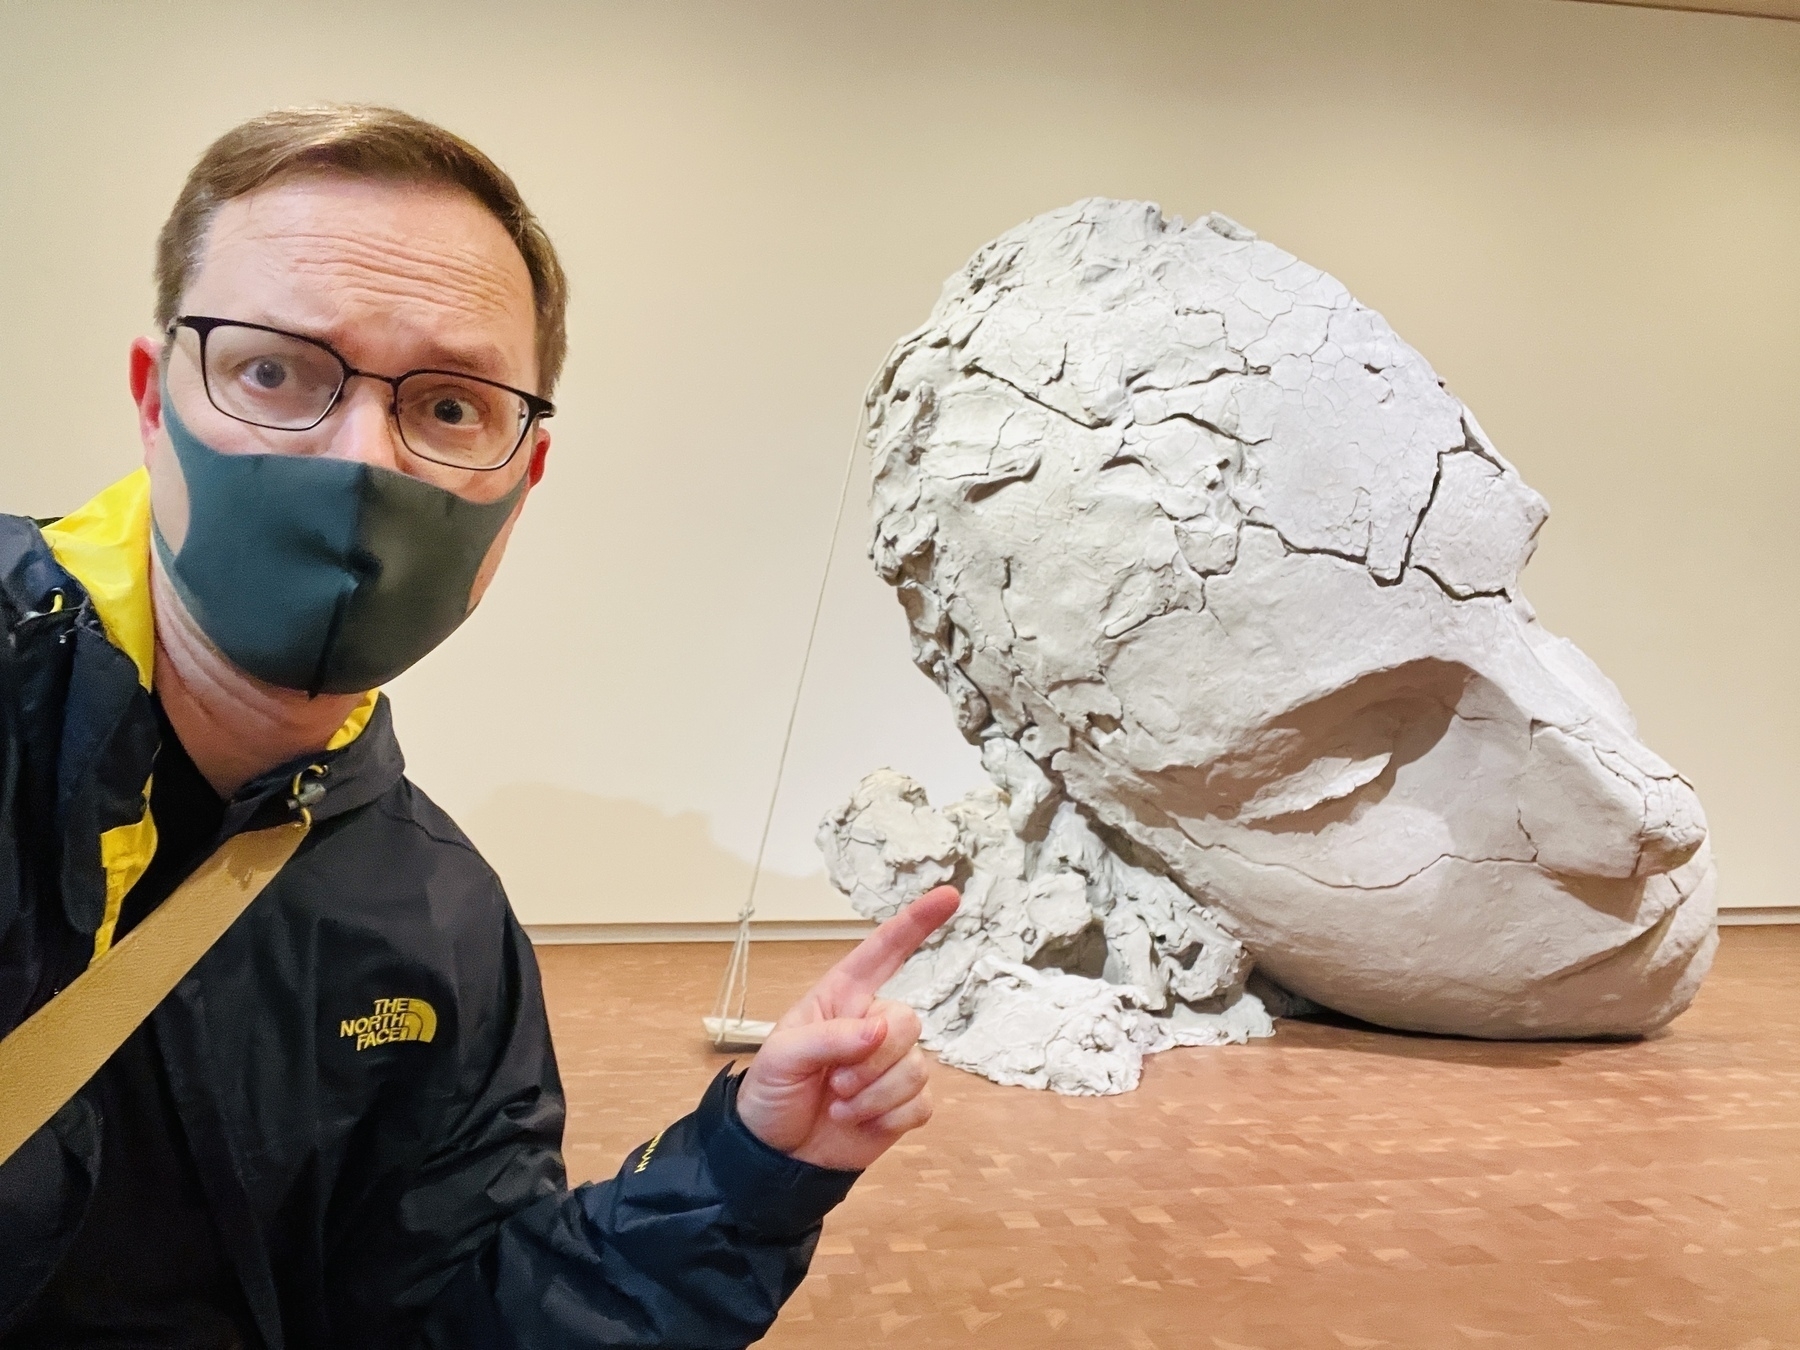 Chad selfie in front of a 5 foot tall sculpture of half a head in what looks like dry cracked clay, and positioned like it has fallen on the floor